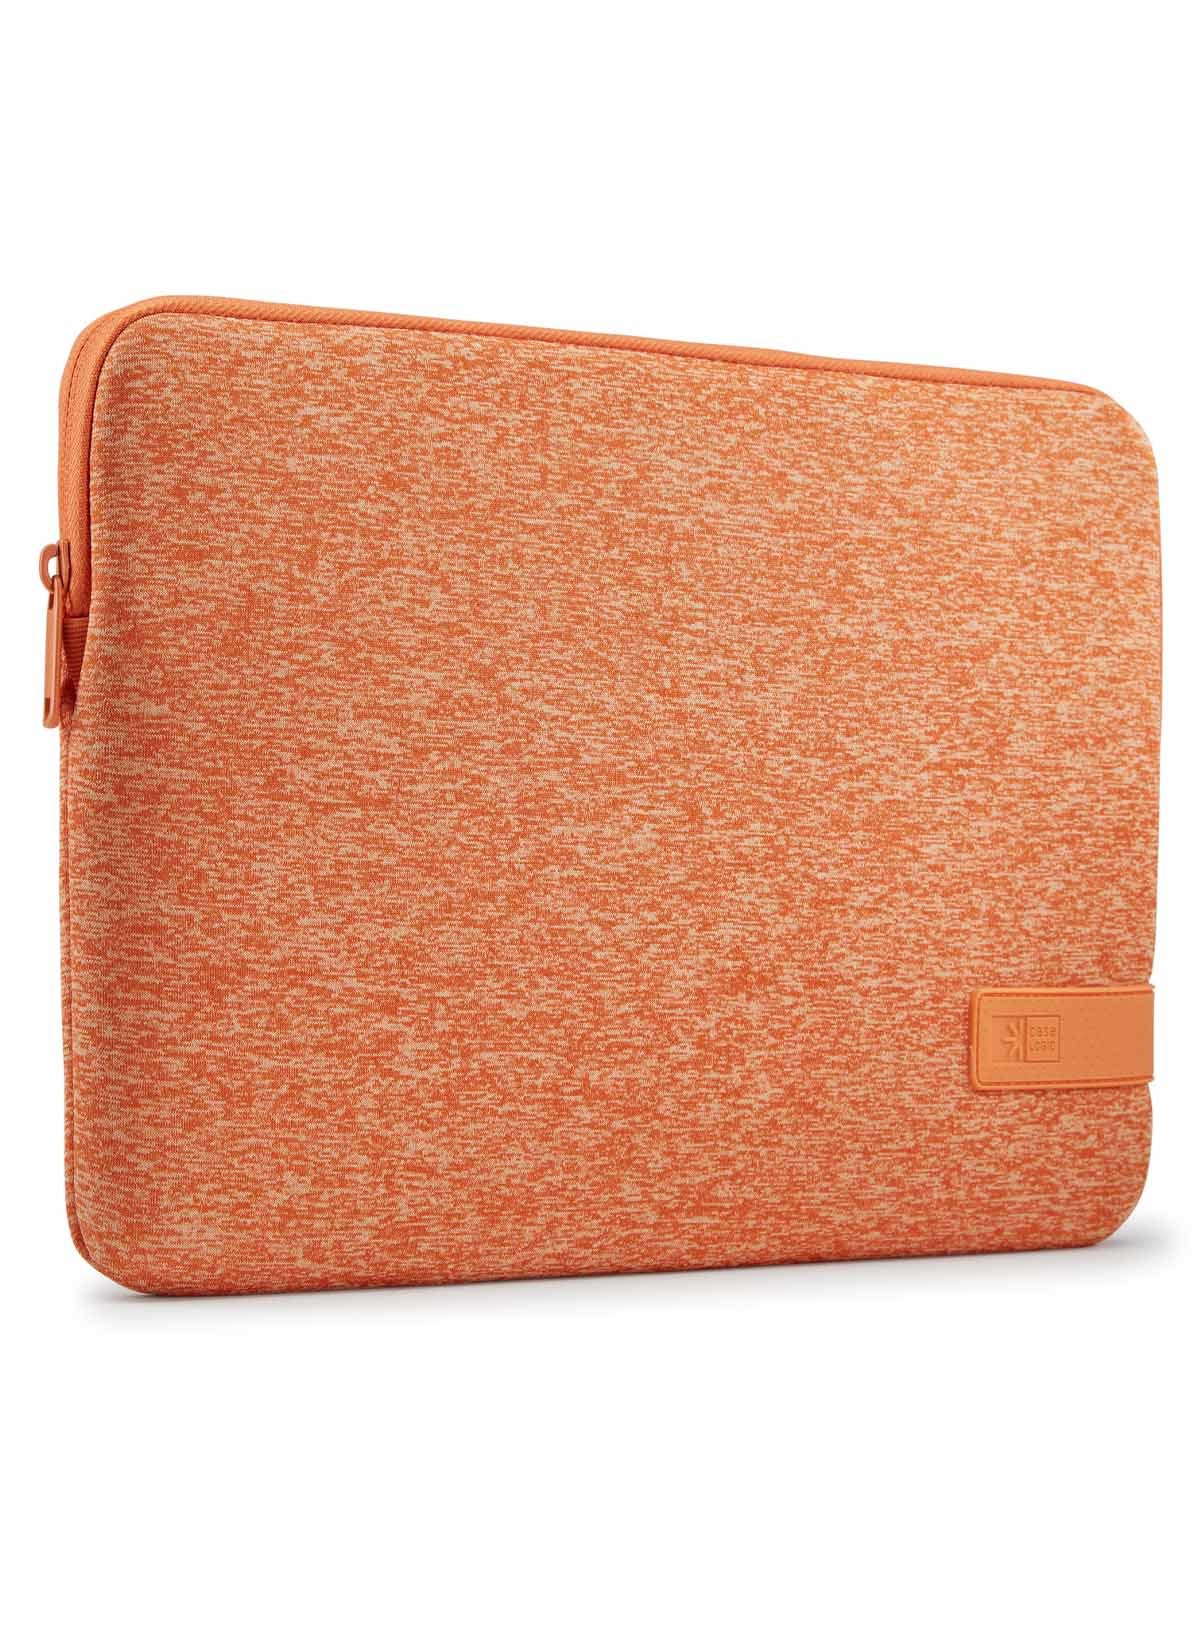 LOGIC Gold/Apricot für CASE Sleeve Polyester, Notebook Universal Sleeve Coral Reflect